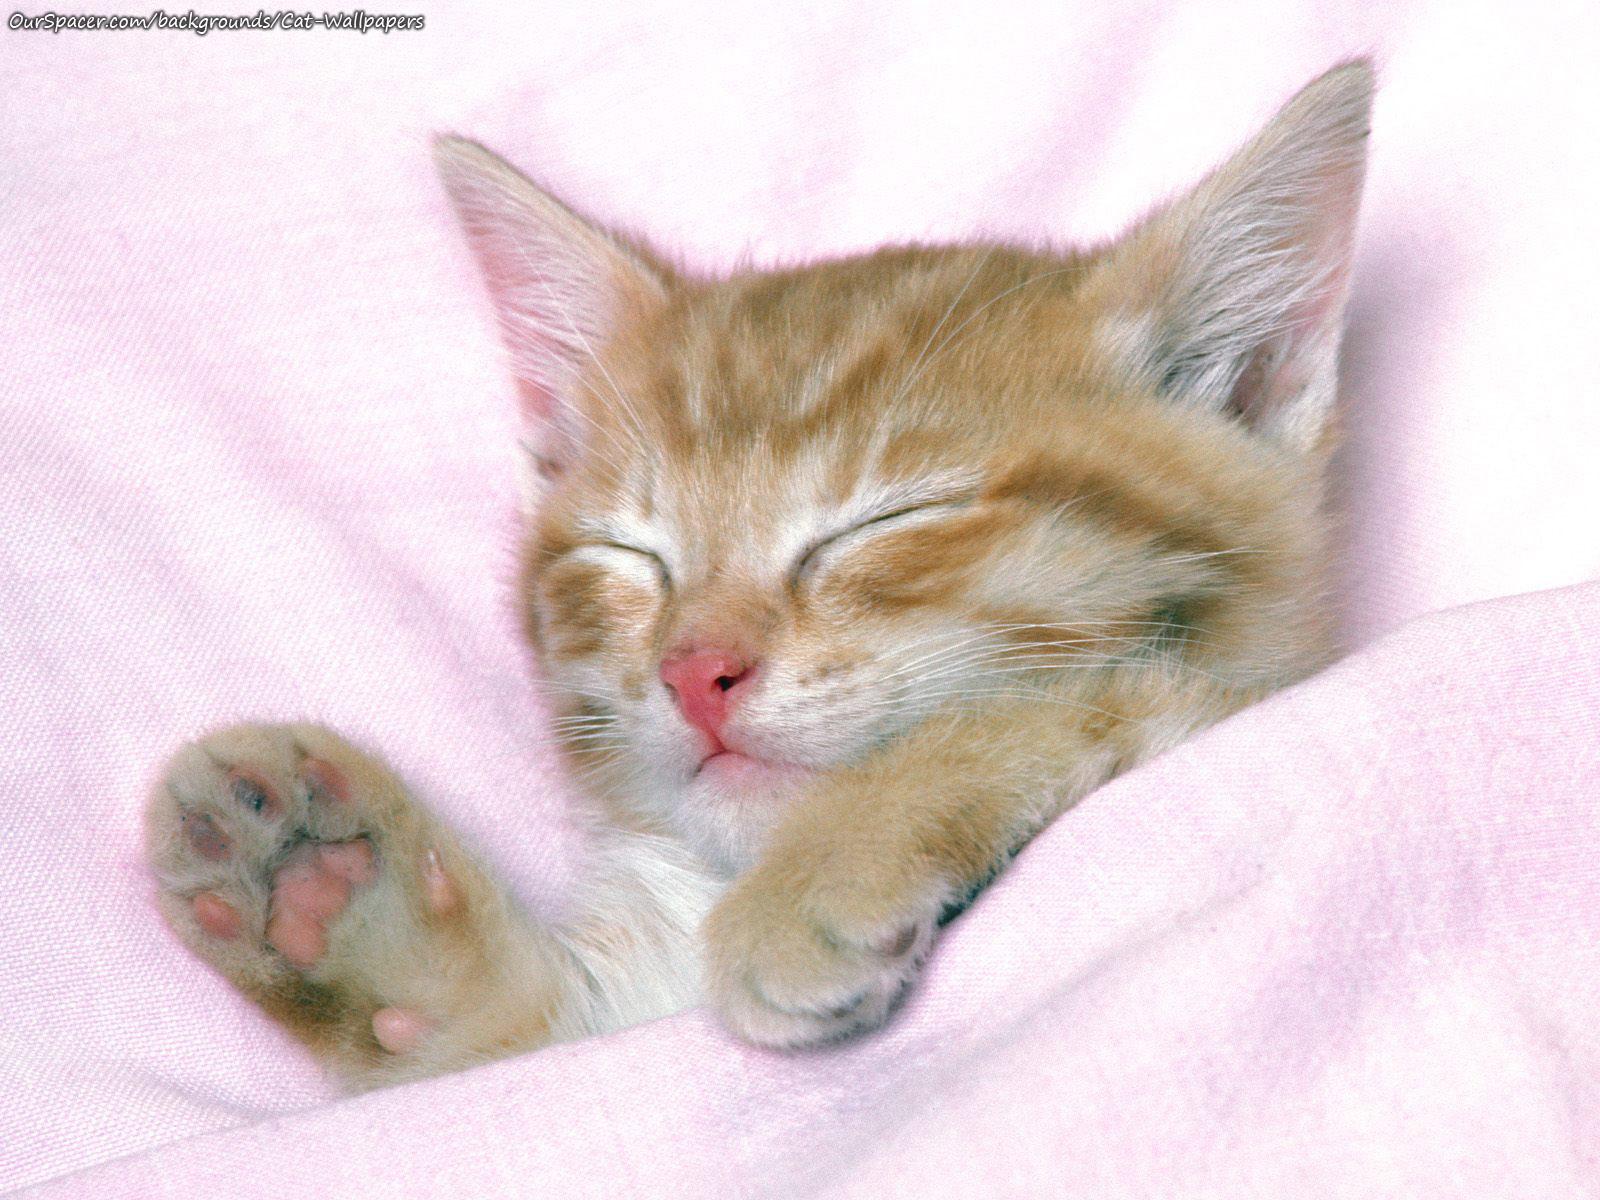 Kitten taking a nap wallpaper and background for myspace